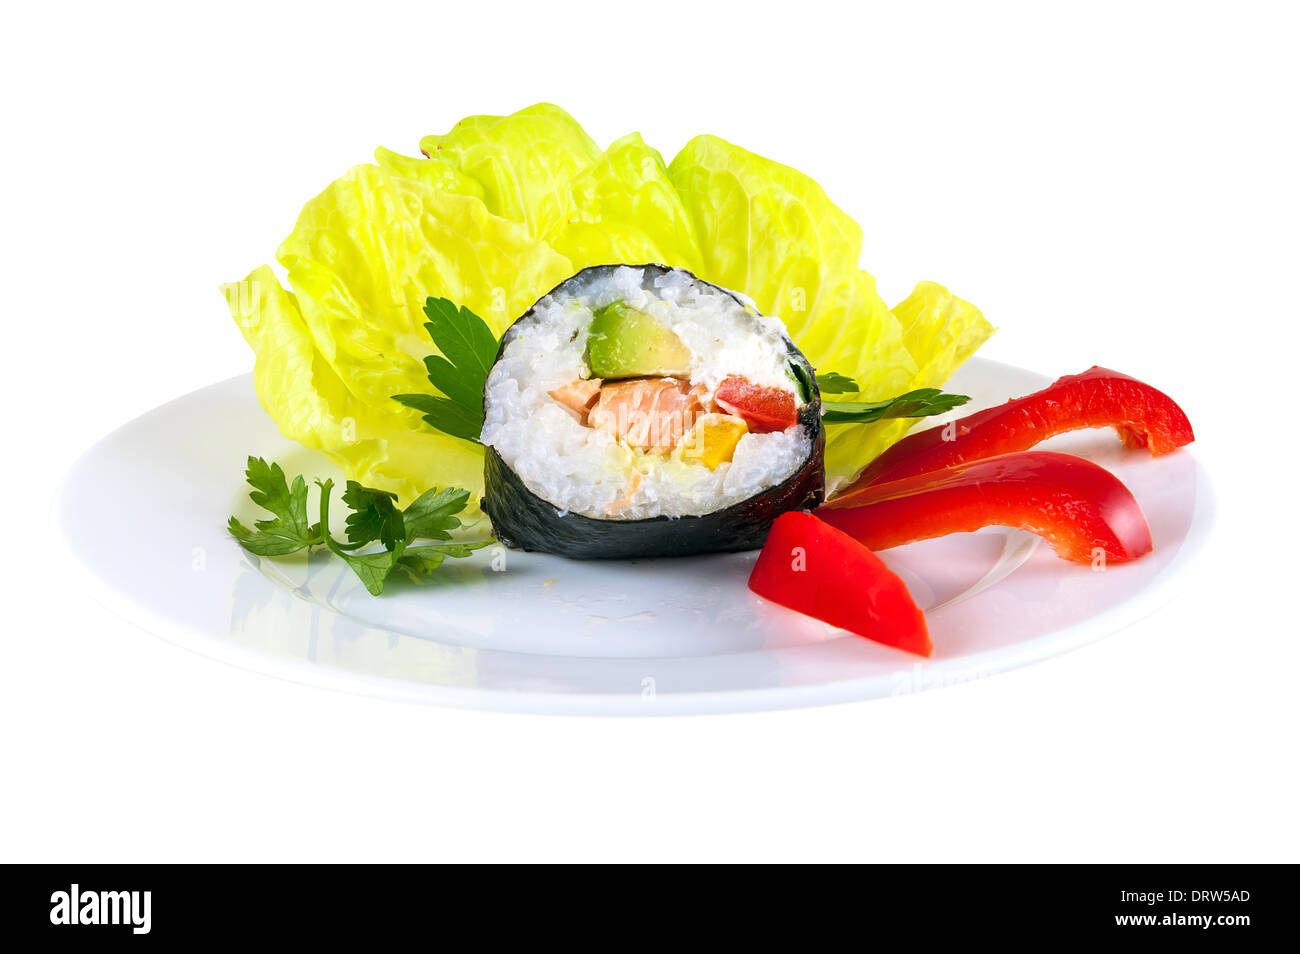 One piece of sushi on decorated plate isolated on white background with clipping path Stock Photo